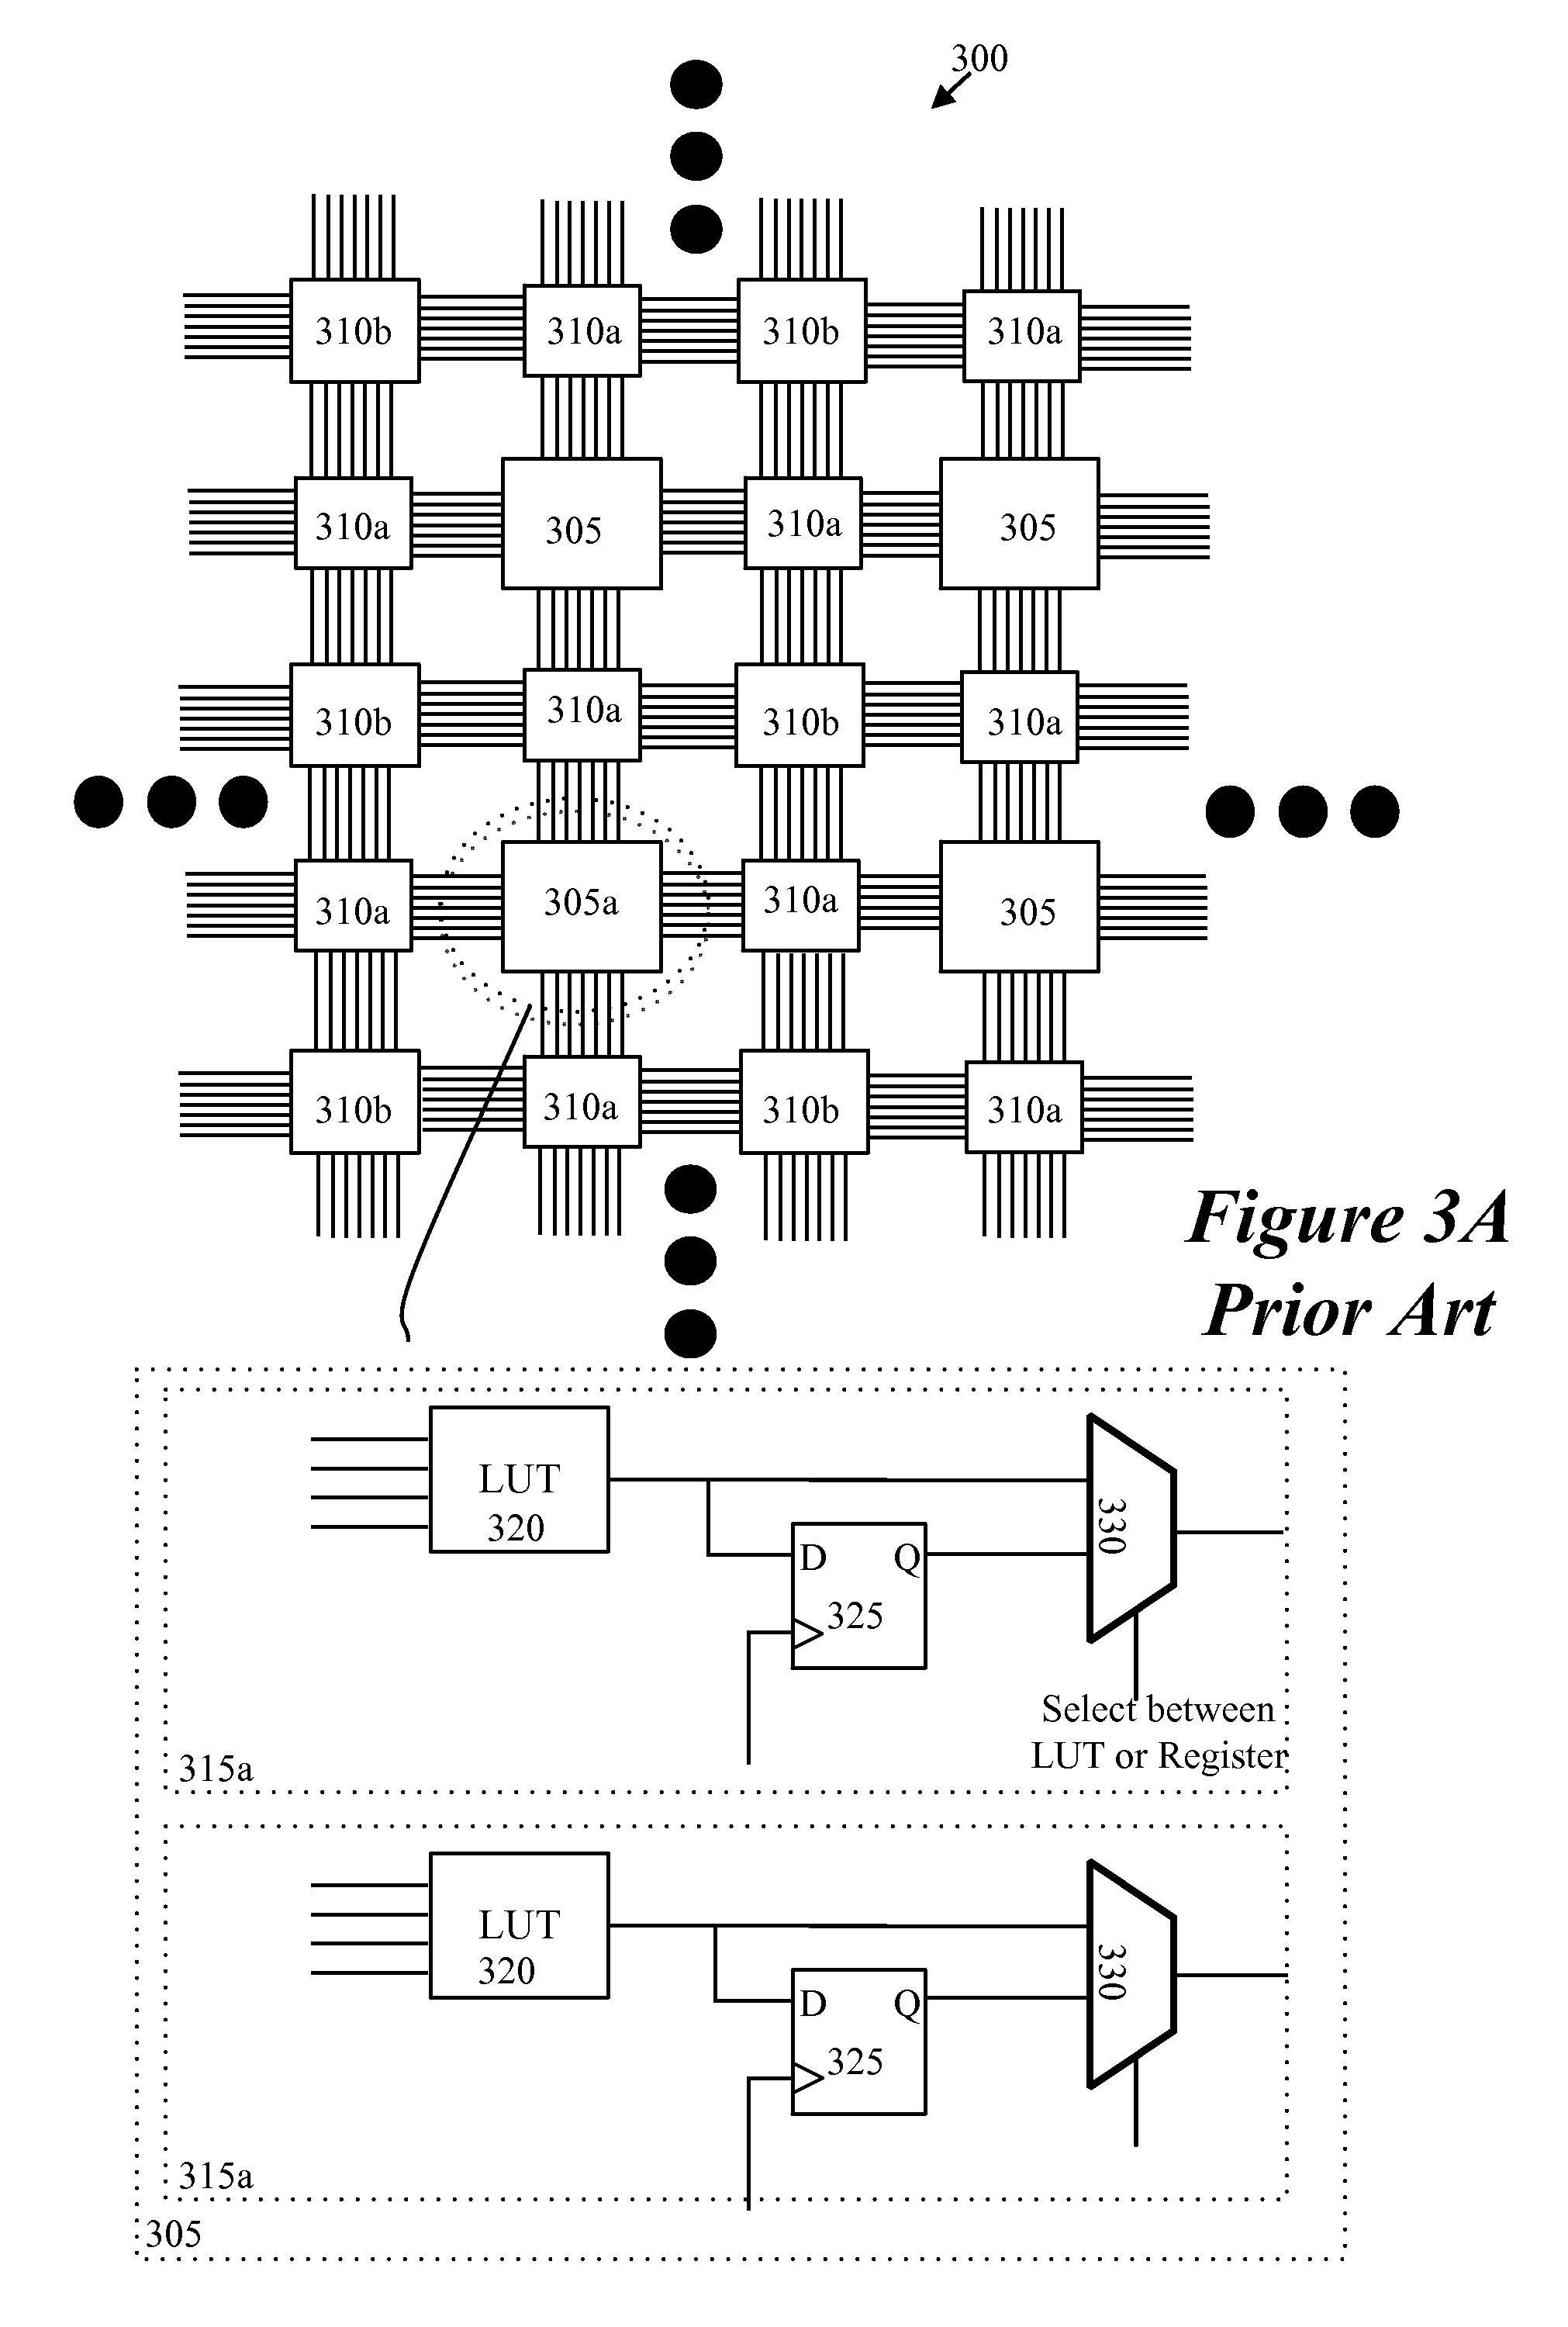 Configurable IC having a routing fabric with storage elements